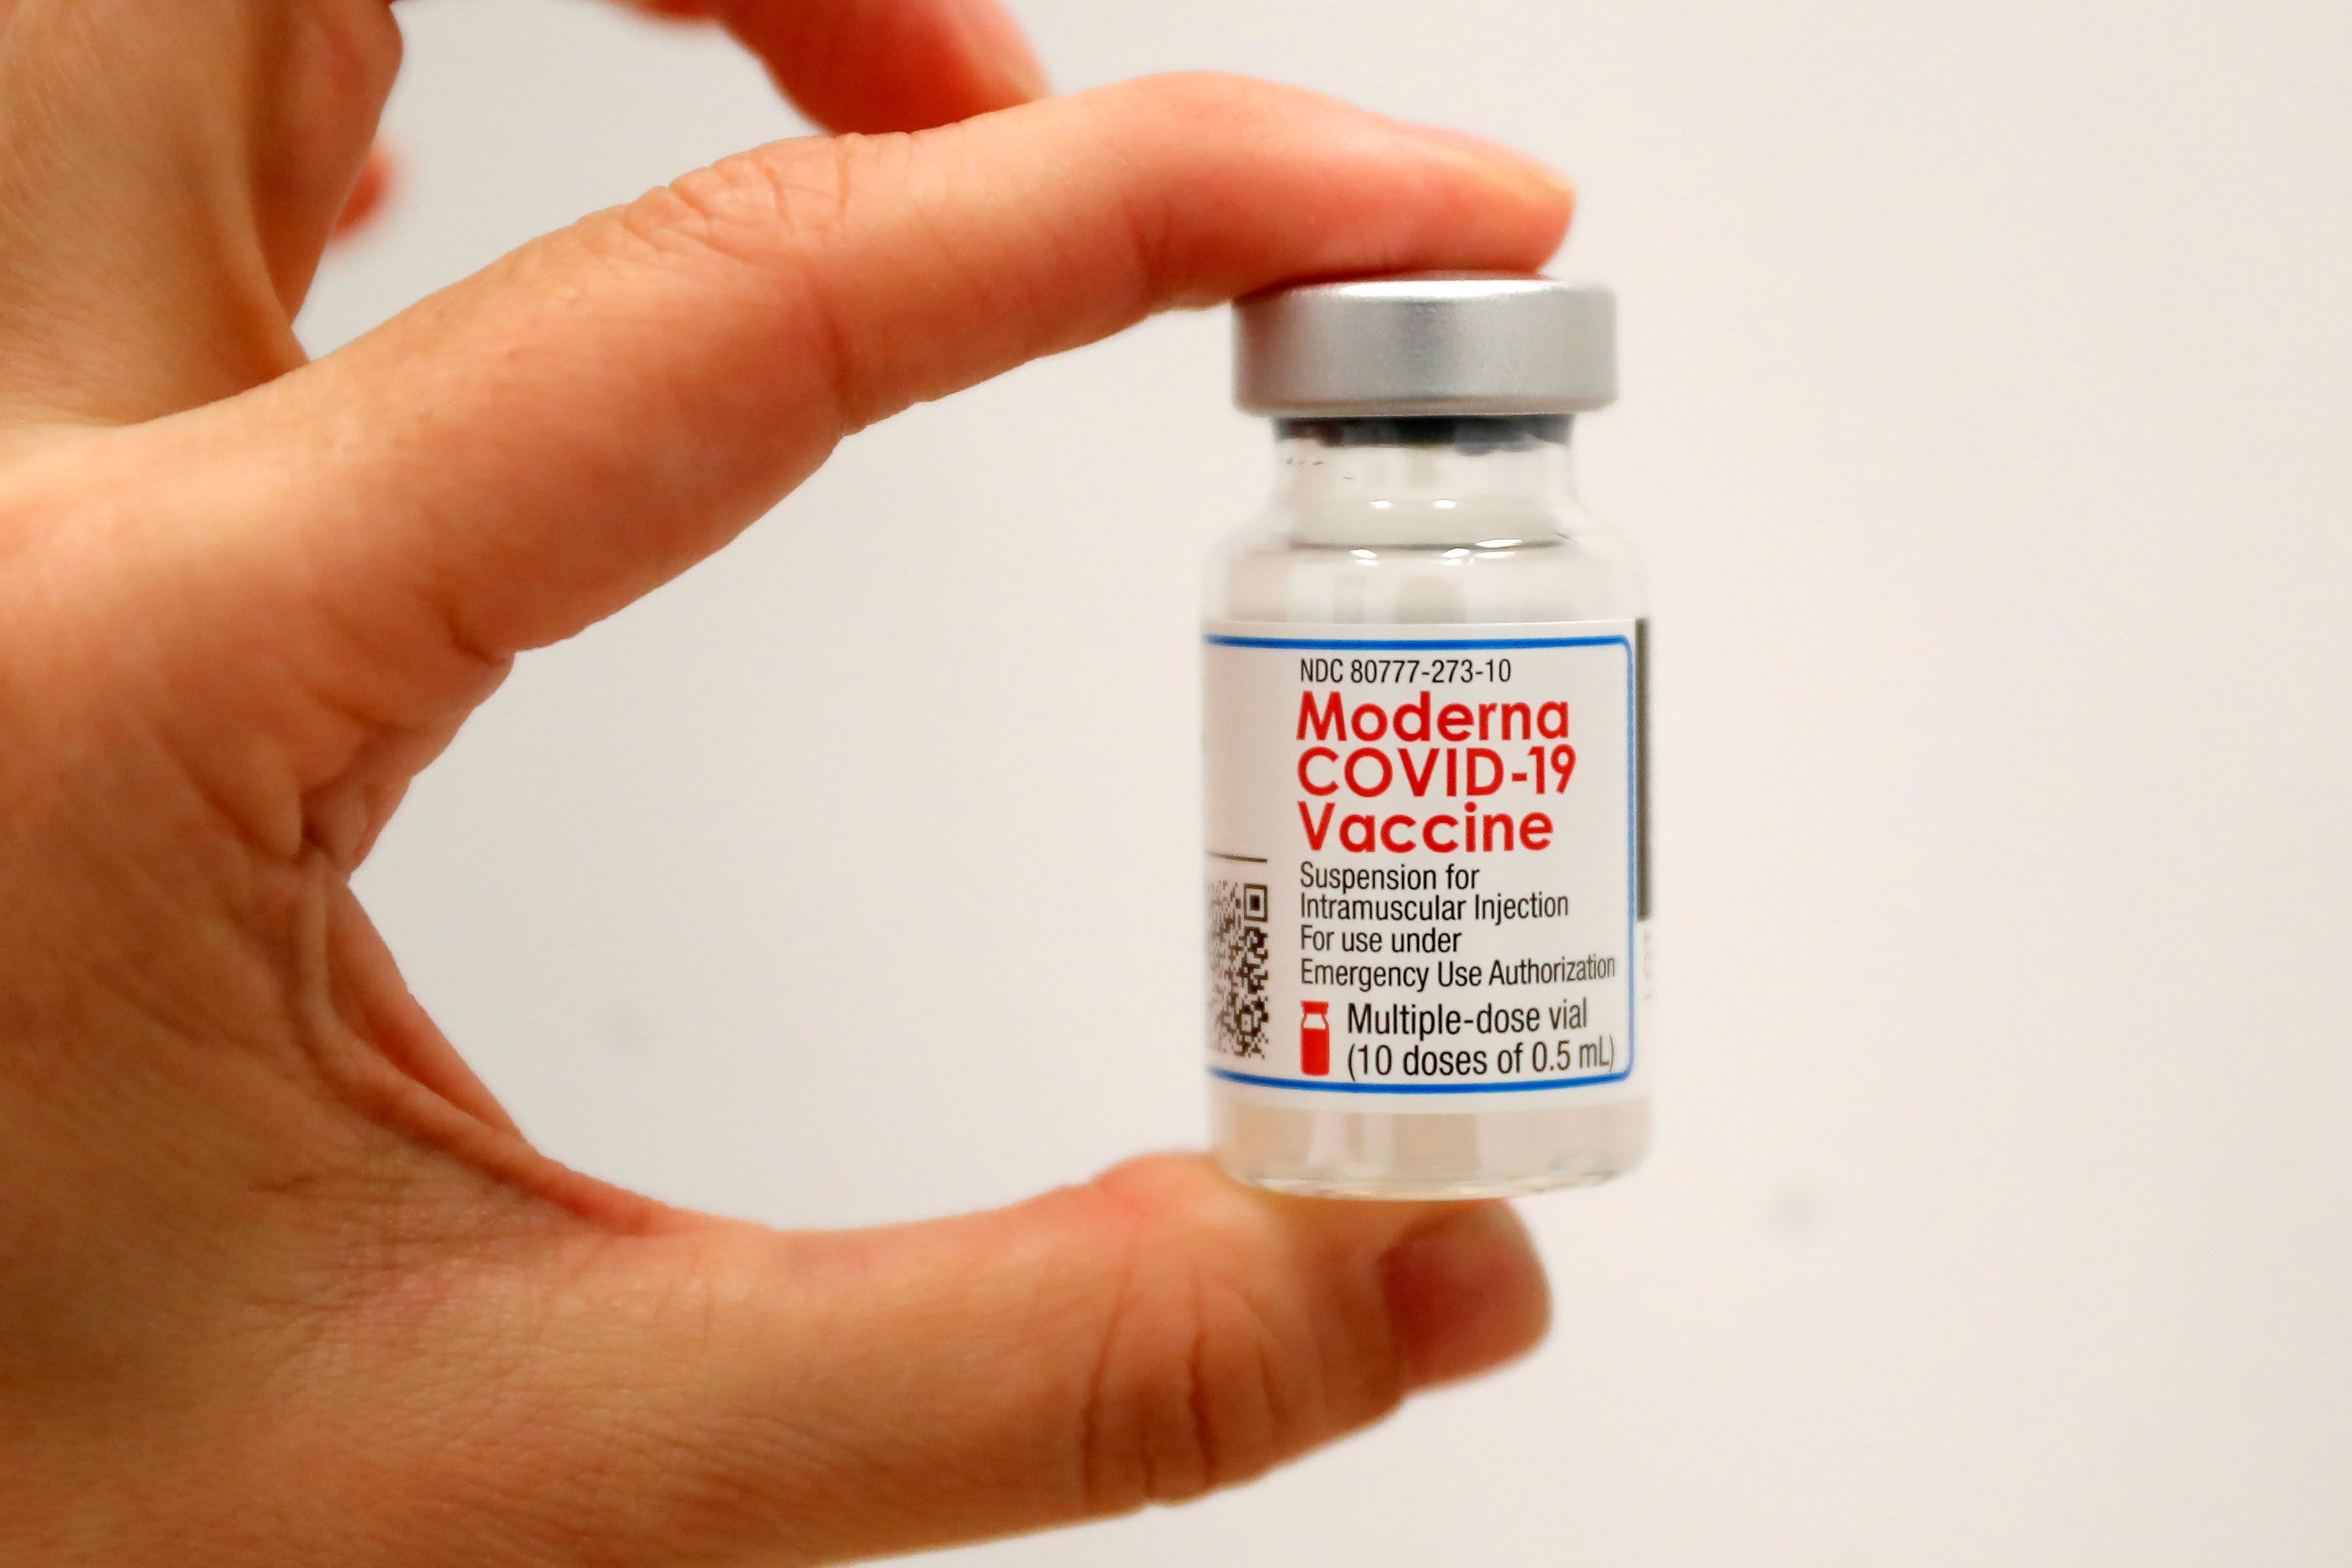 Moderna asks the FDA to allow 5 extra doses per vial of Covid vaccine: Source